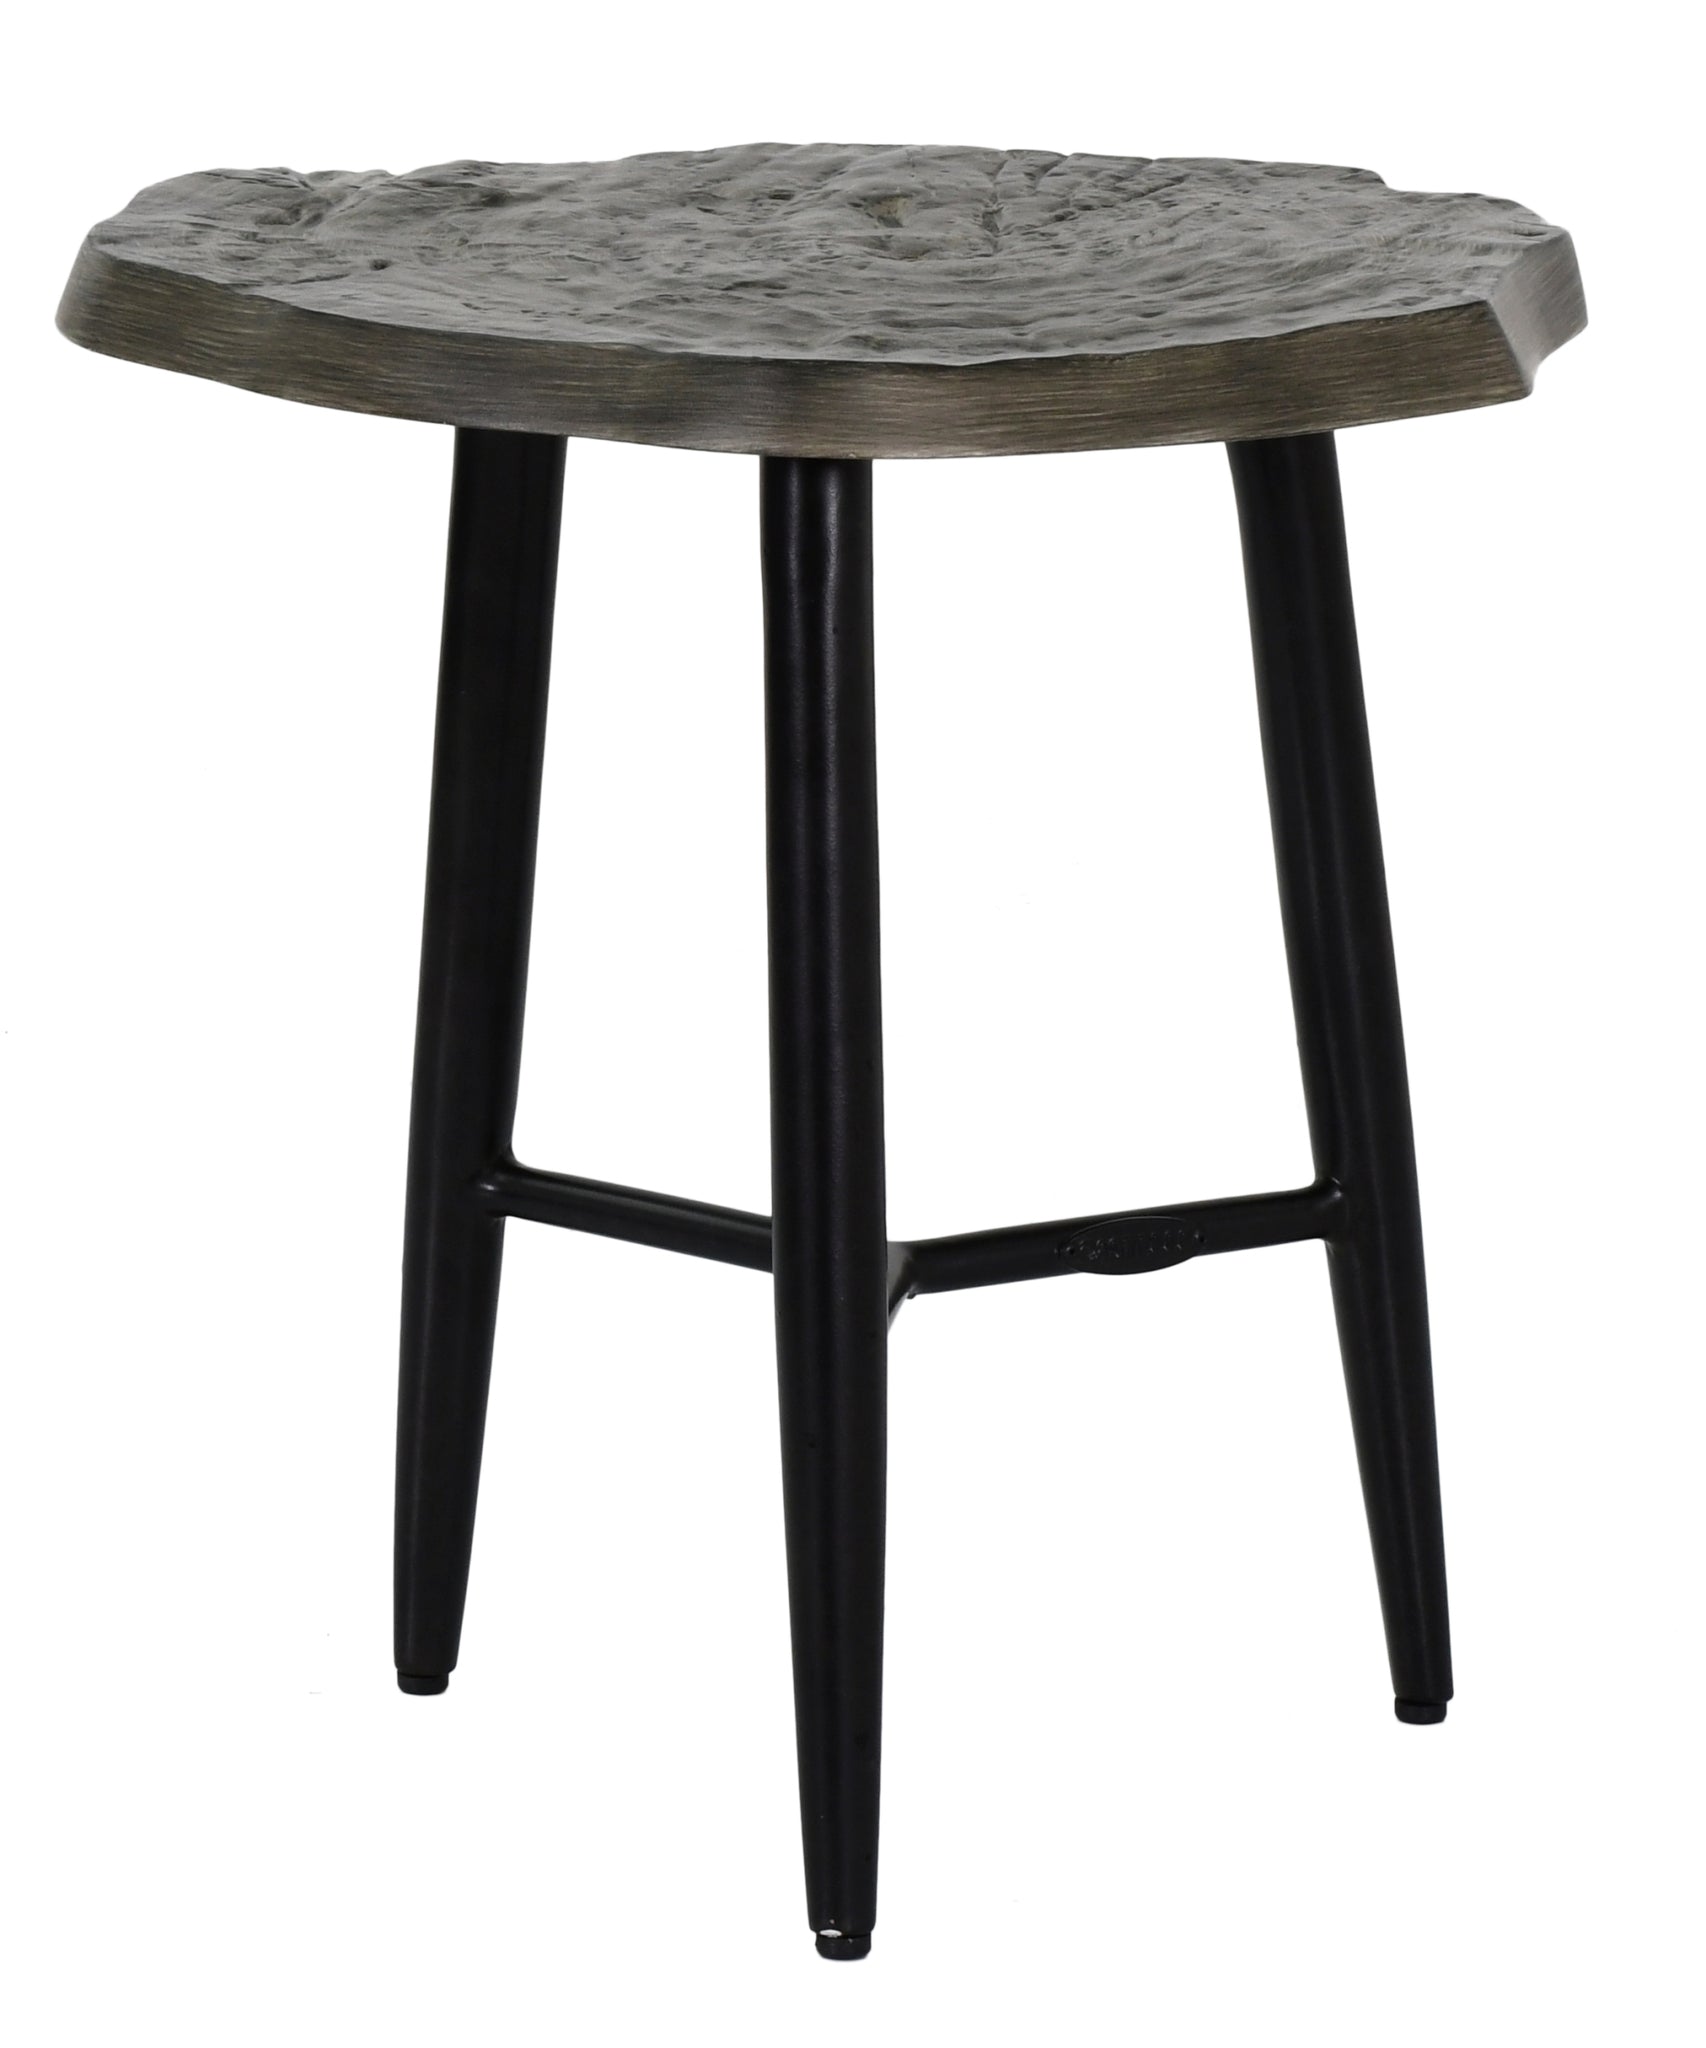 Castelle Nature's Wood 20" Side Table with Weathered Wood with Walnut Top and Antique Dark Rum Finish 12038585